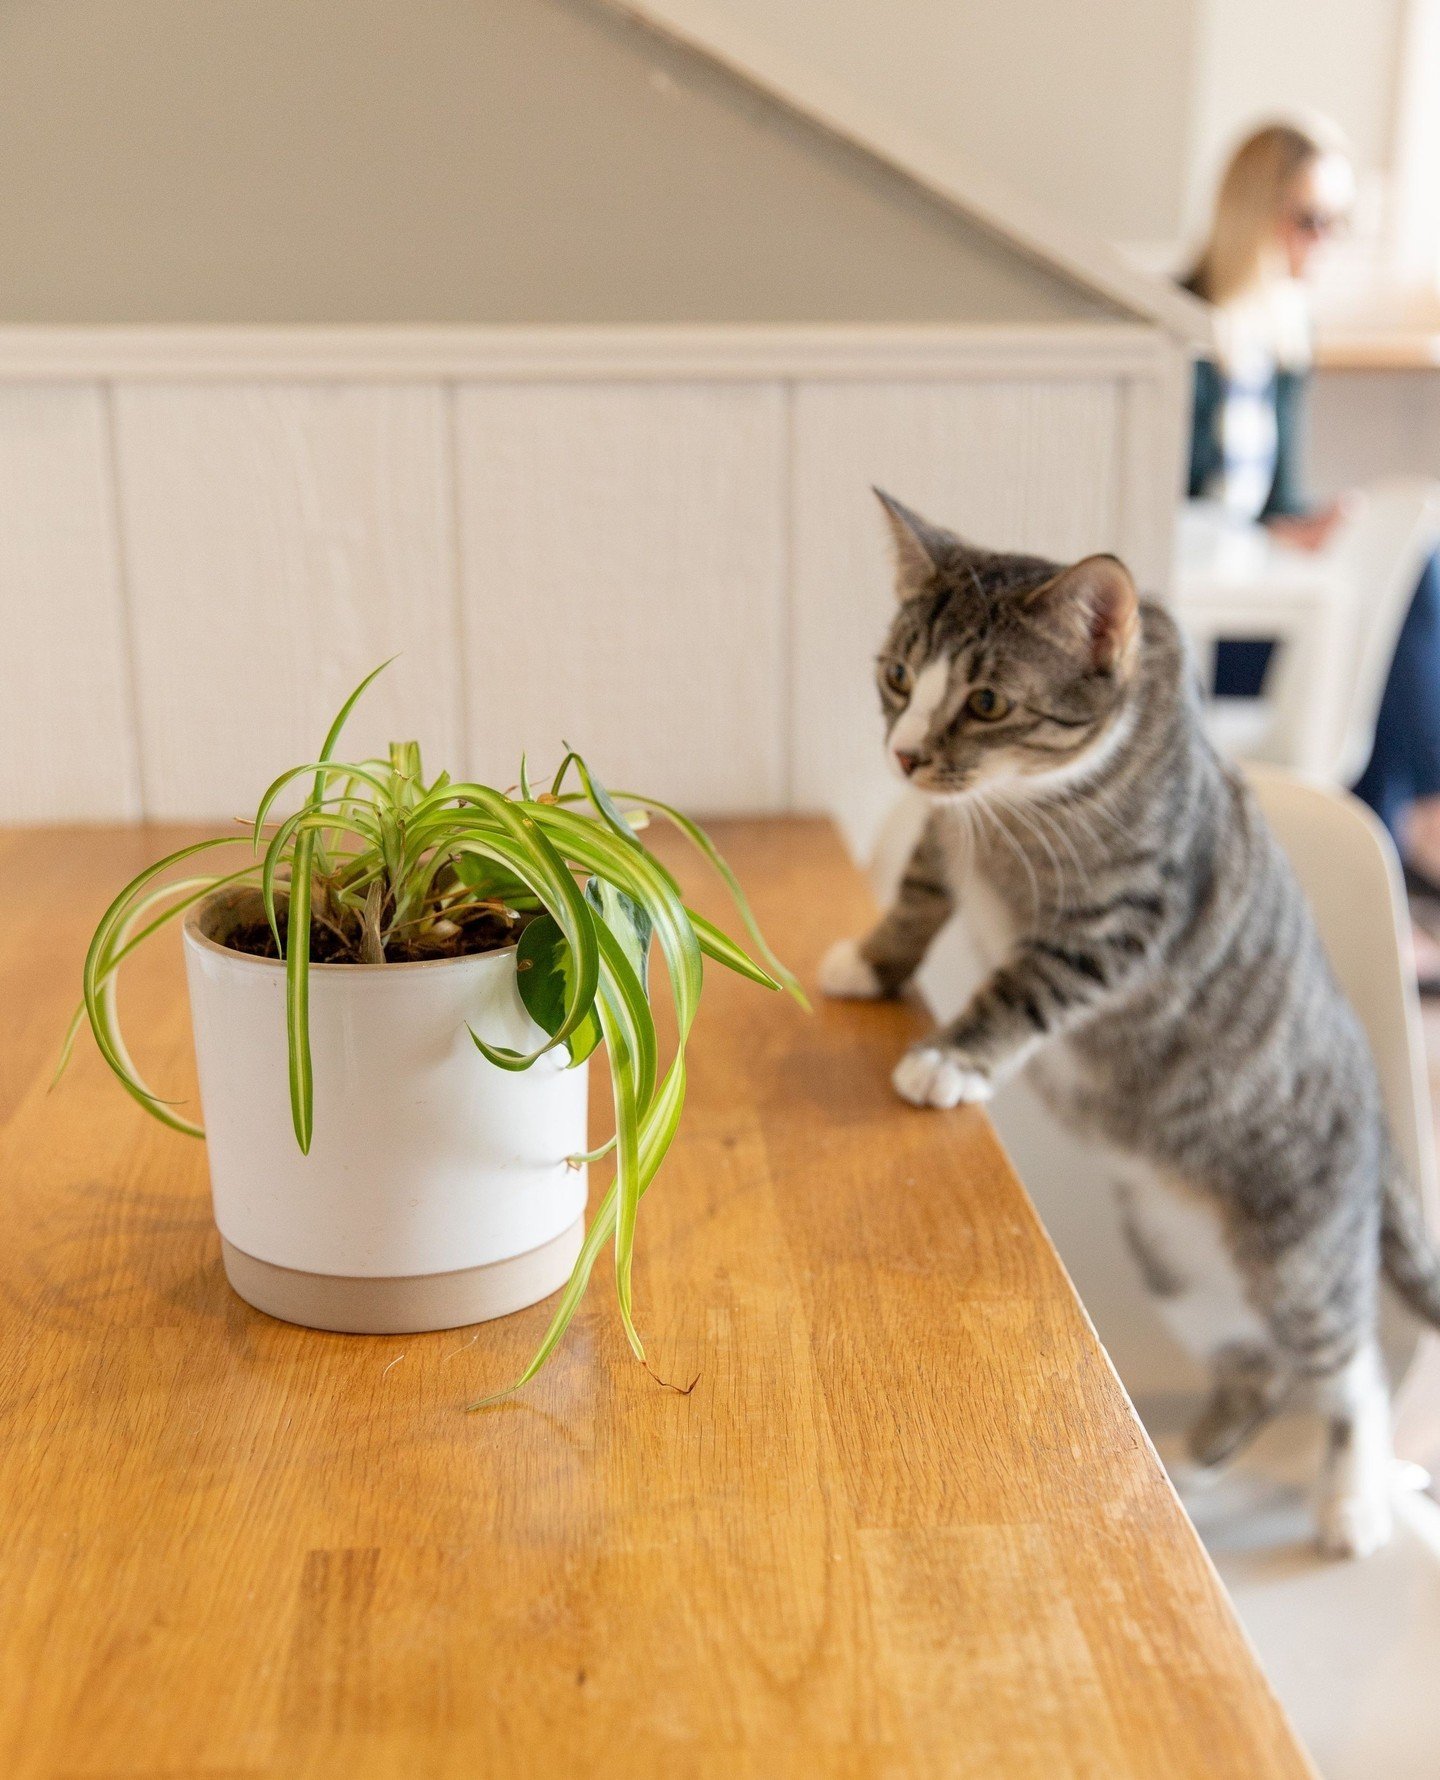 Join us on Wednesday, May 15th for our first Plants for Paws event! 🪴 ⁠
⁠
Stop in the Catfe to purchase plants with 100% of the proceeds going to our nonprofit partner, Gem City Kitties! Together, both Gem City Catfe and Gem City Kitties work to imp